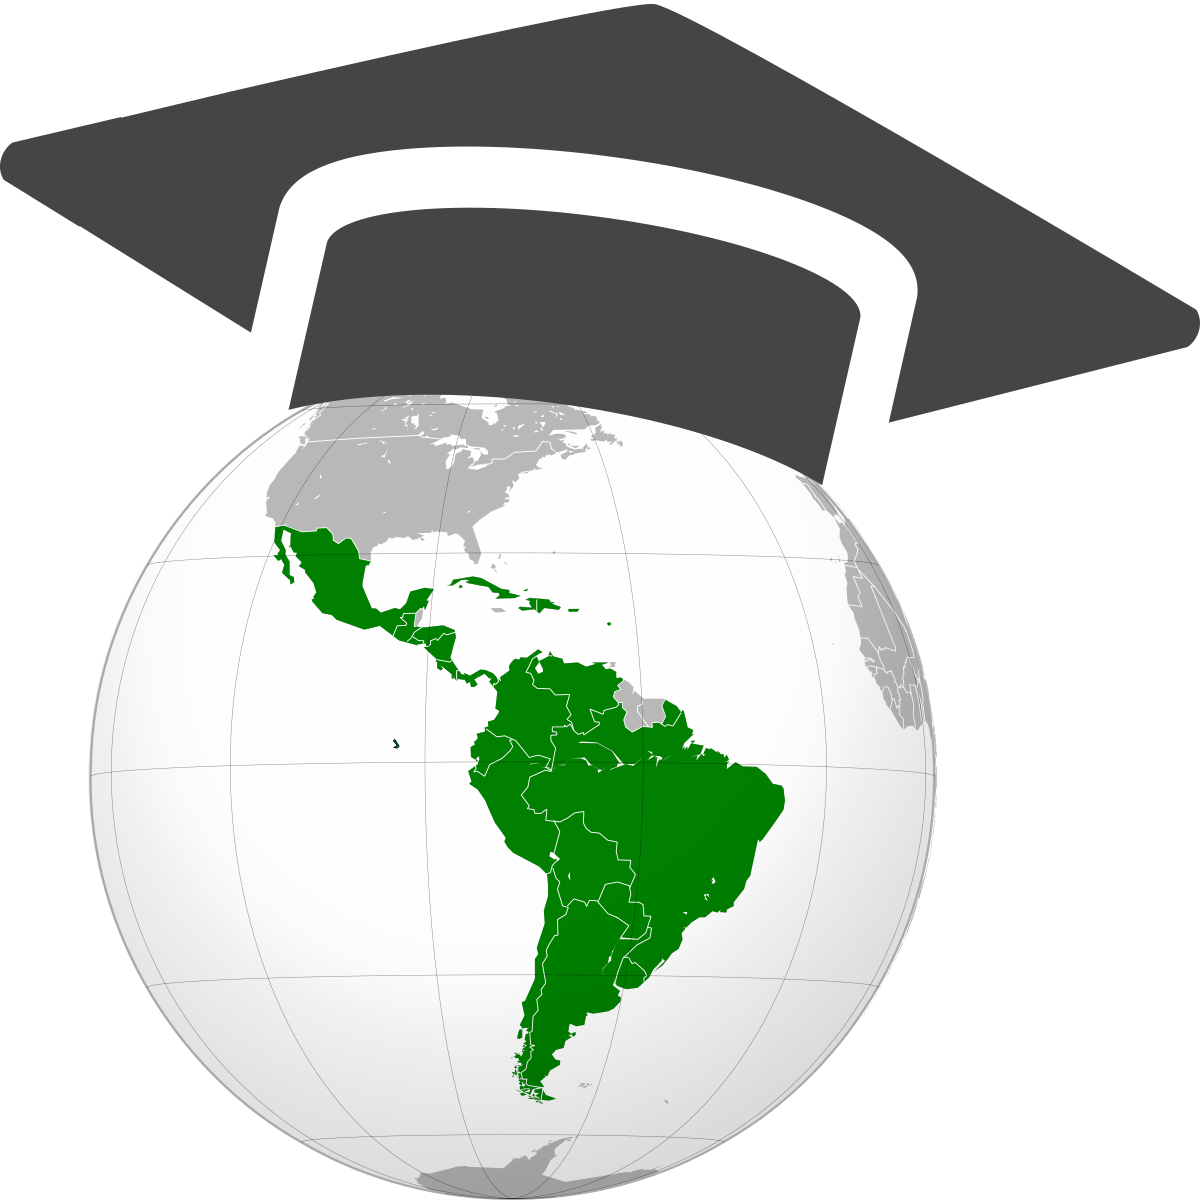 Higher Education and Universities in Latin America